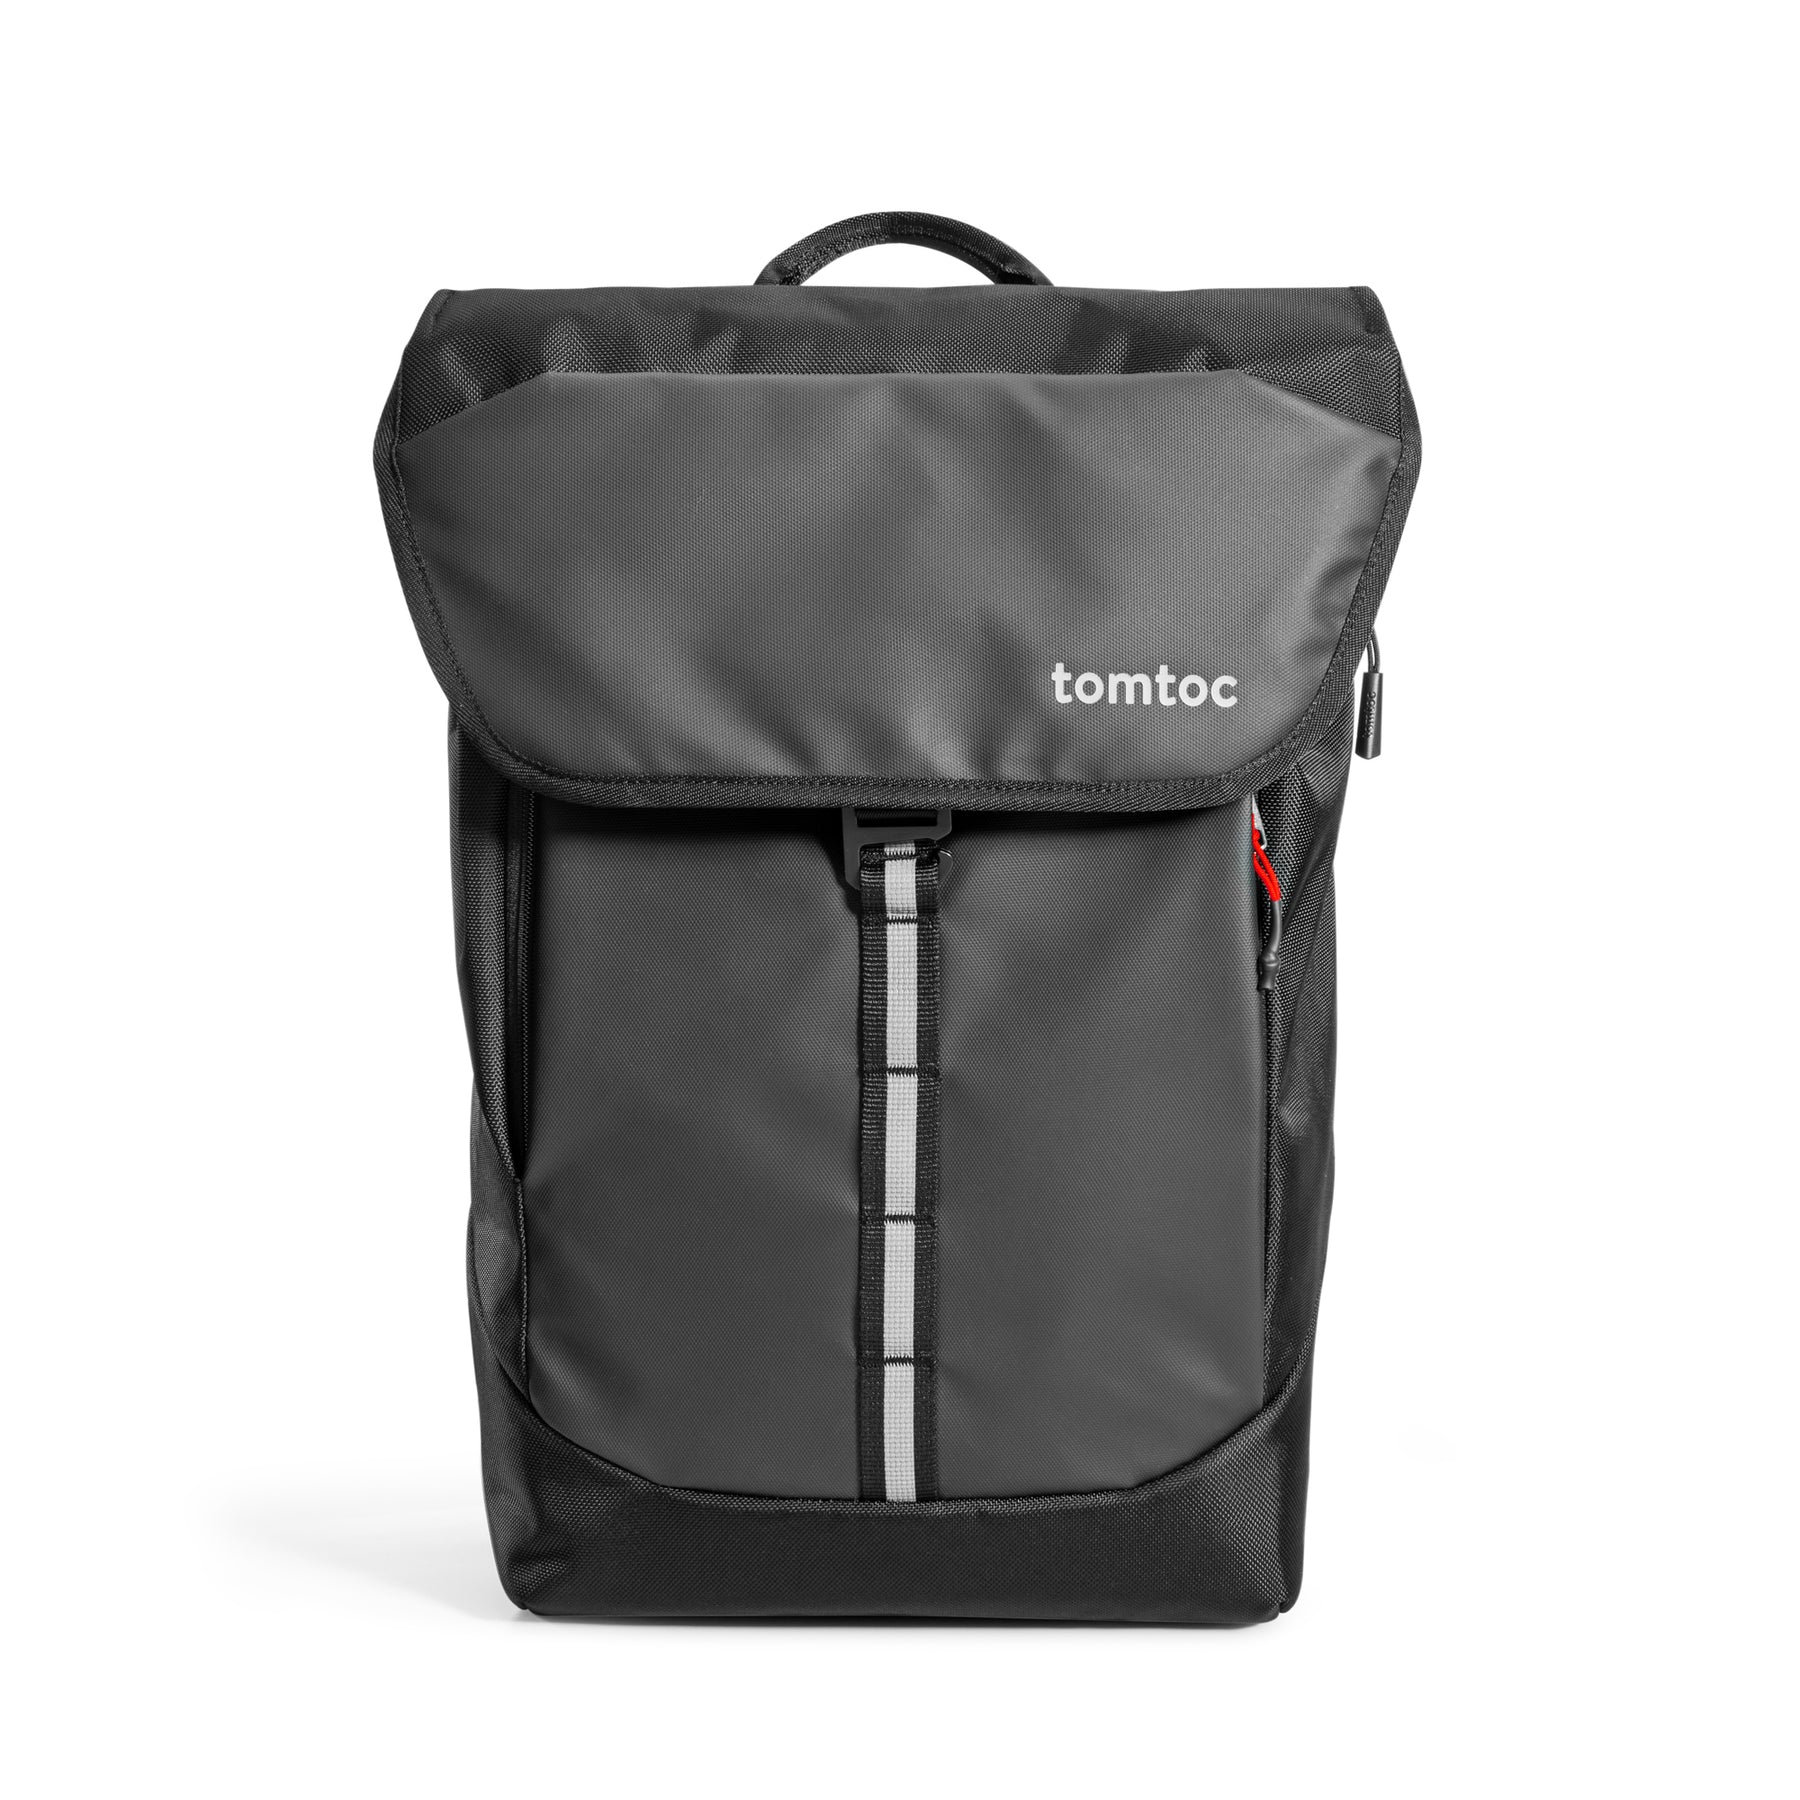 tomtoc 16 Inch Flap Lightweight & Water-Resistant Laptop Backpack - Tu